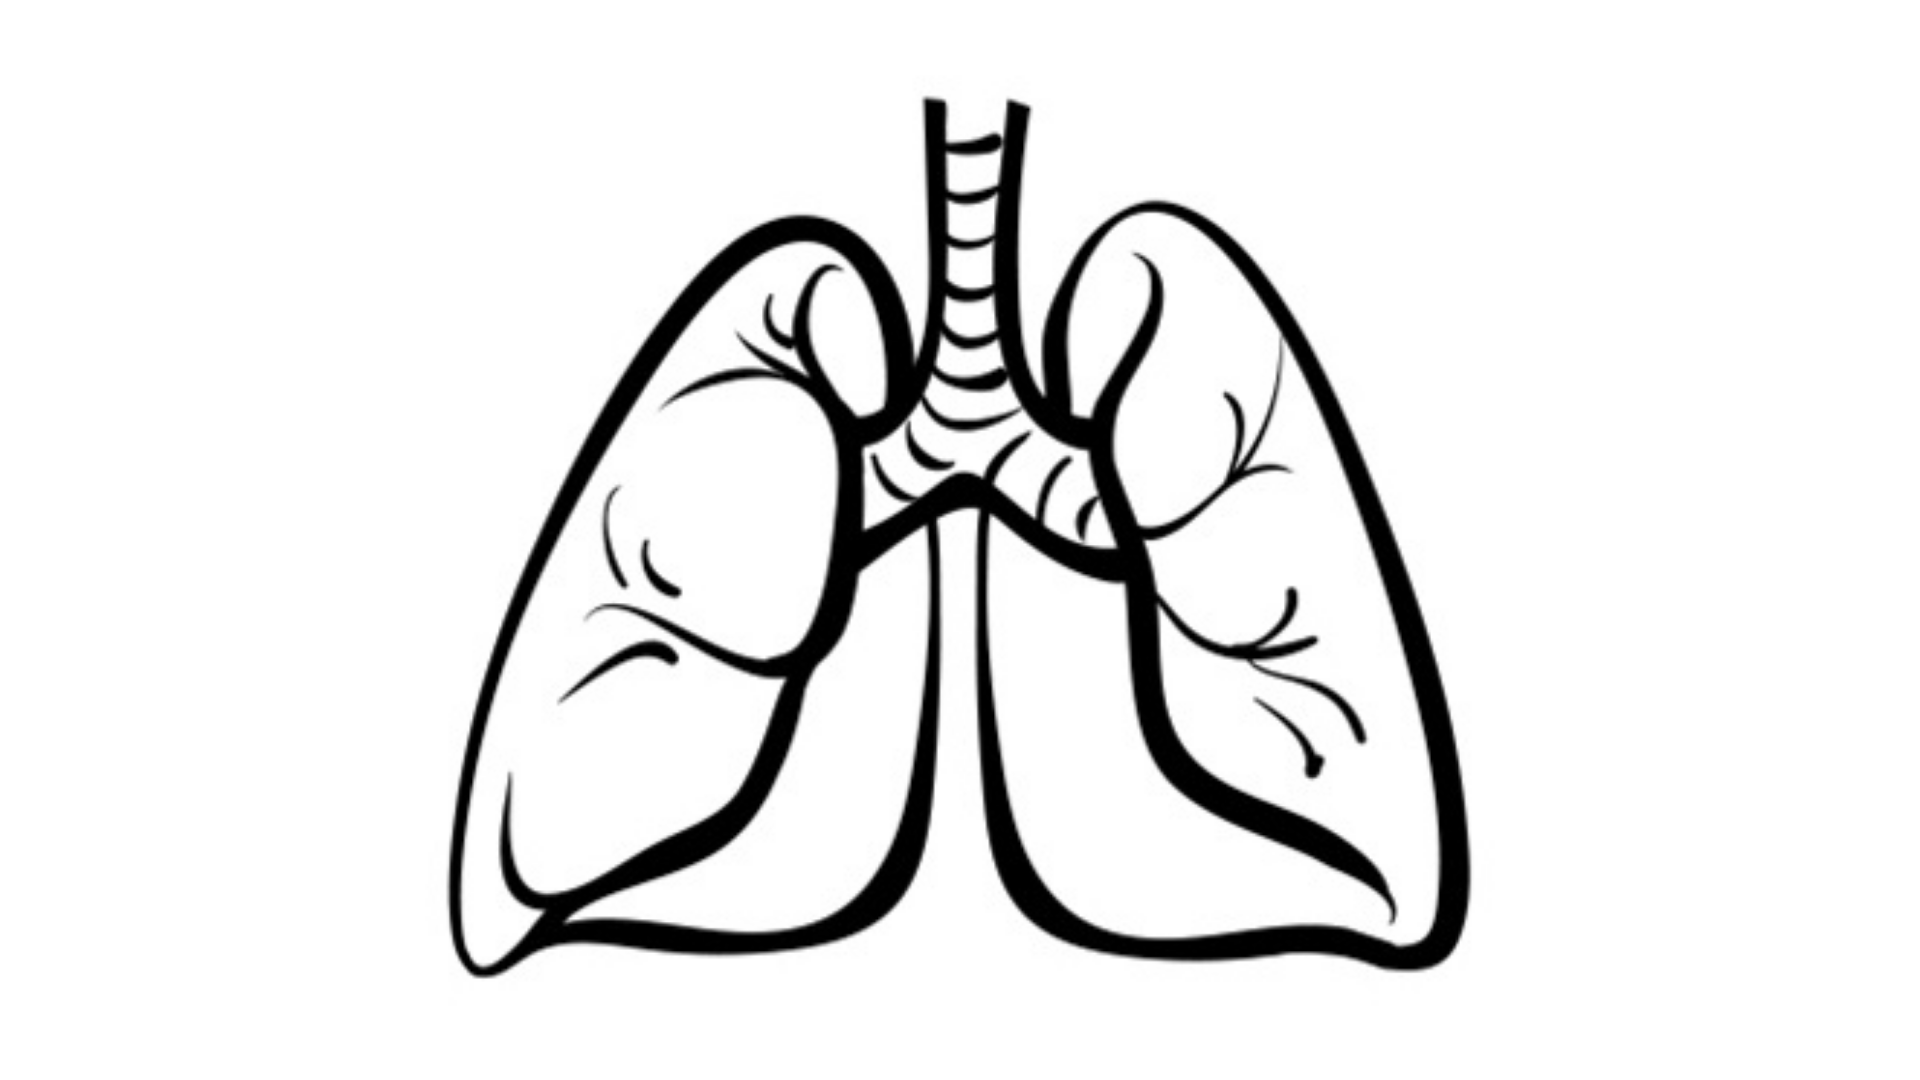 NRG1 Fusions in Lung Cancer Confirmed in Real-World Study